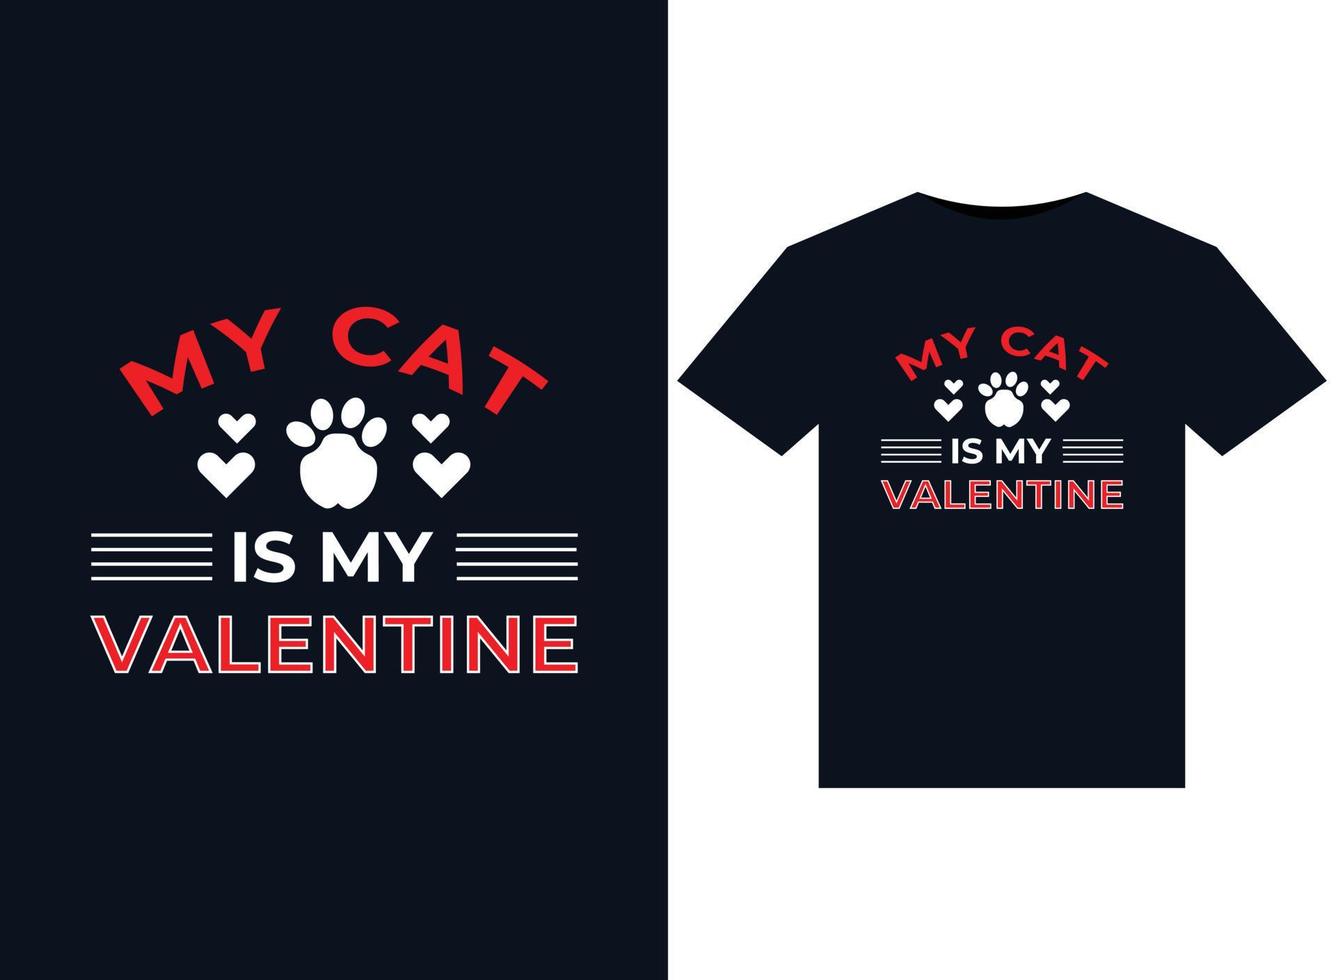 My cat is my valentine illustrations for print-ready T-Shirts design vector